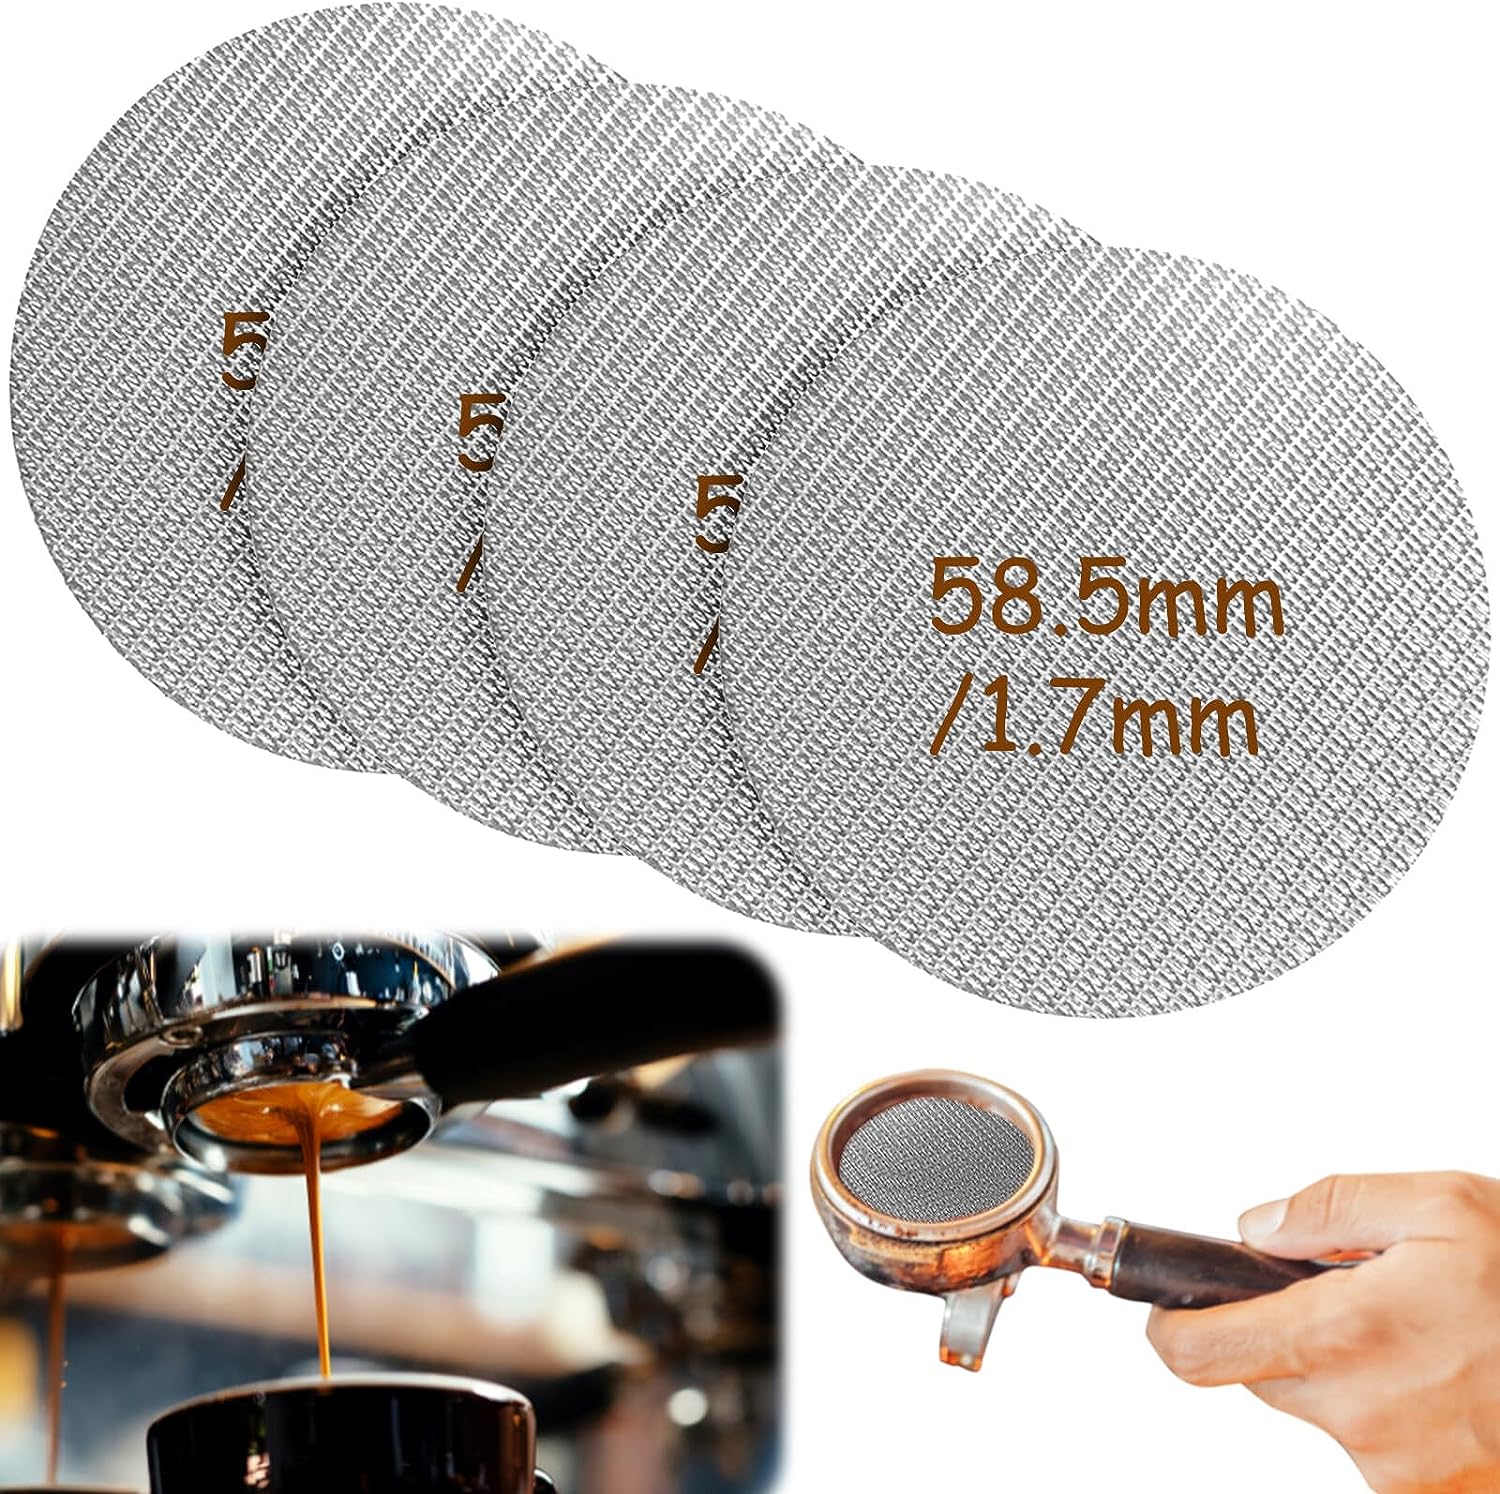 Espresso Strainer for Portafilter, 58.5 mm Puck Screen, Coffee Portafilter Strainer, Sintered Coffee Filter, Espresso Accessories, 1.7 mm Thickness, 150 μm, Stainless Steel, 316, Reusable Coffee Puck